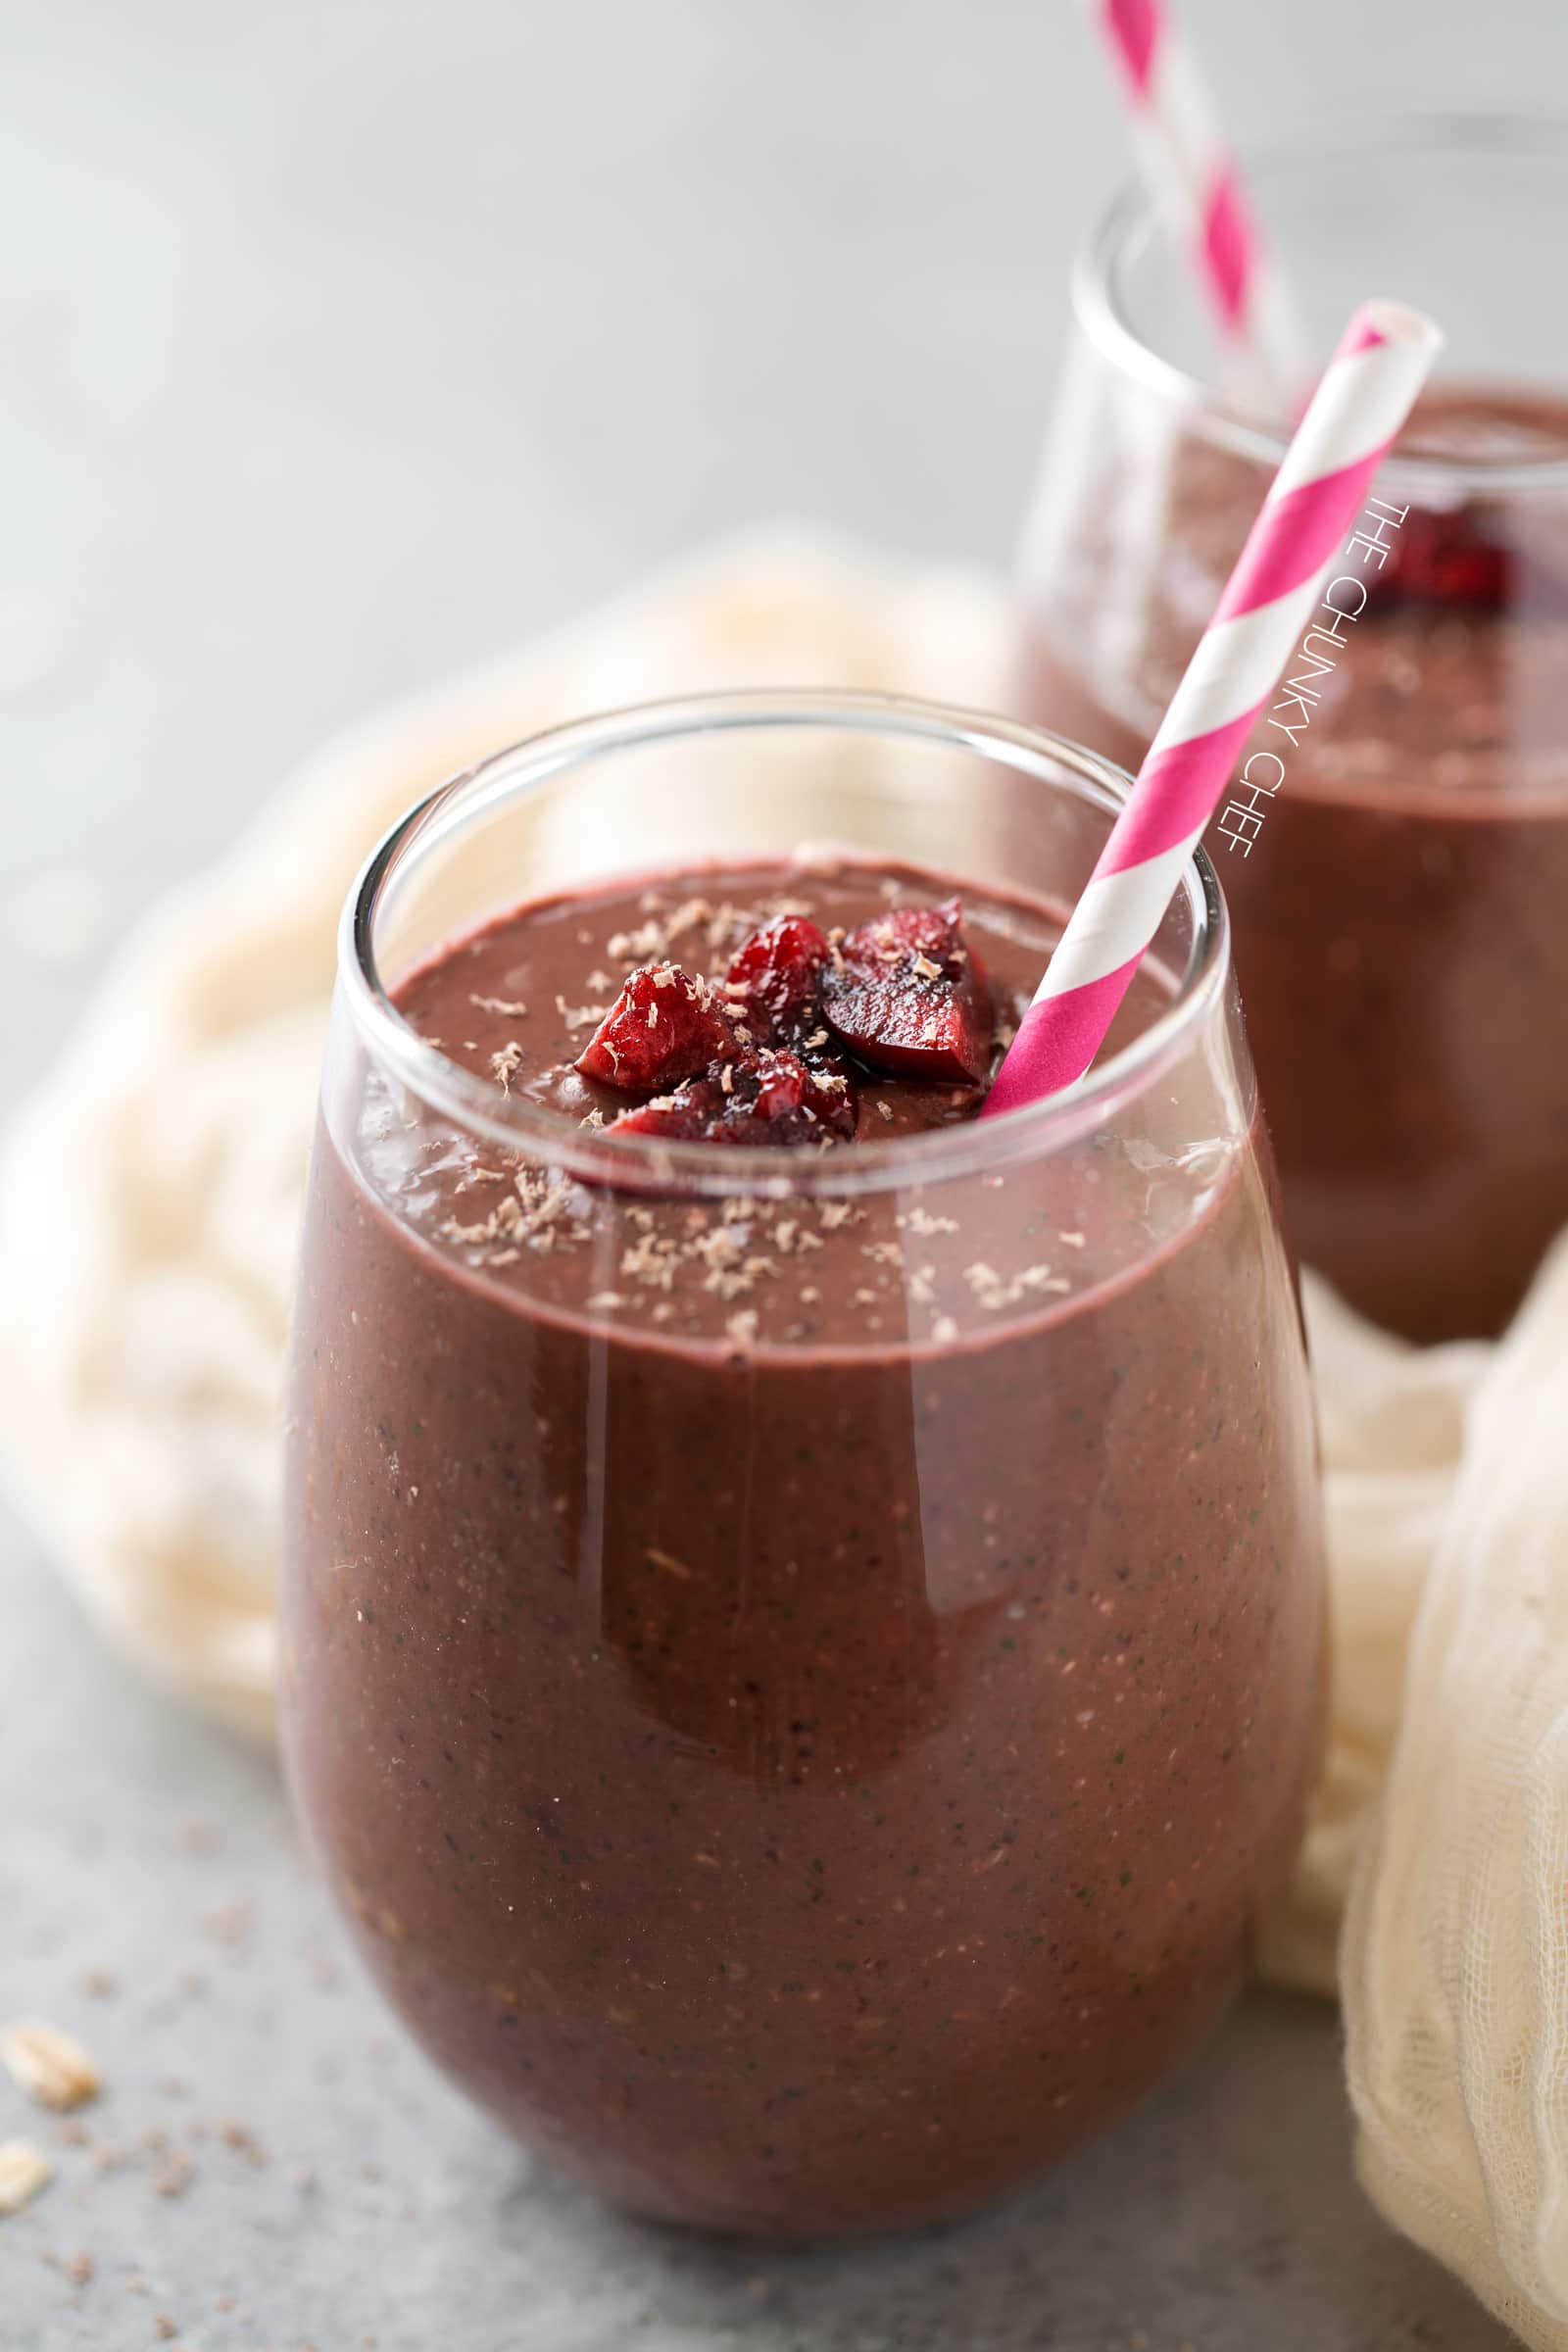 Black Forest Smoothie | This smoothie tastes like dessert, yet is secretly packed full of nutrients (even greens), to help you stick to your resolutions! | http://thechunkychef.com